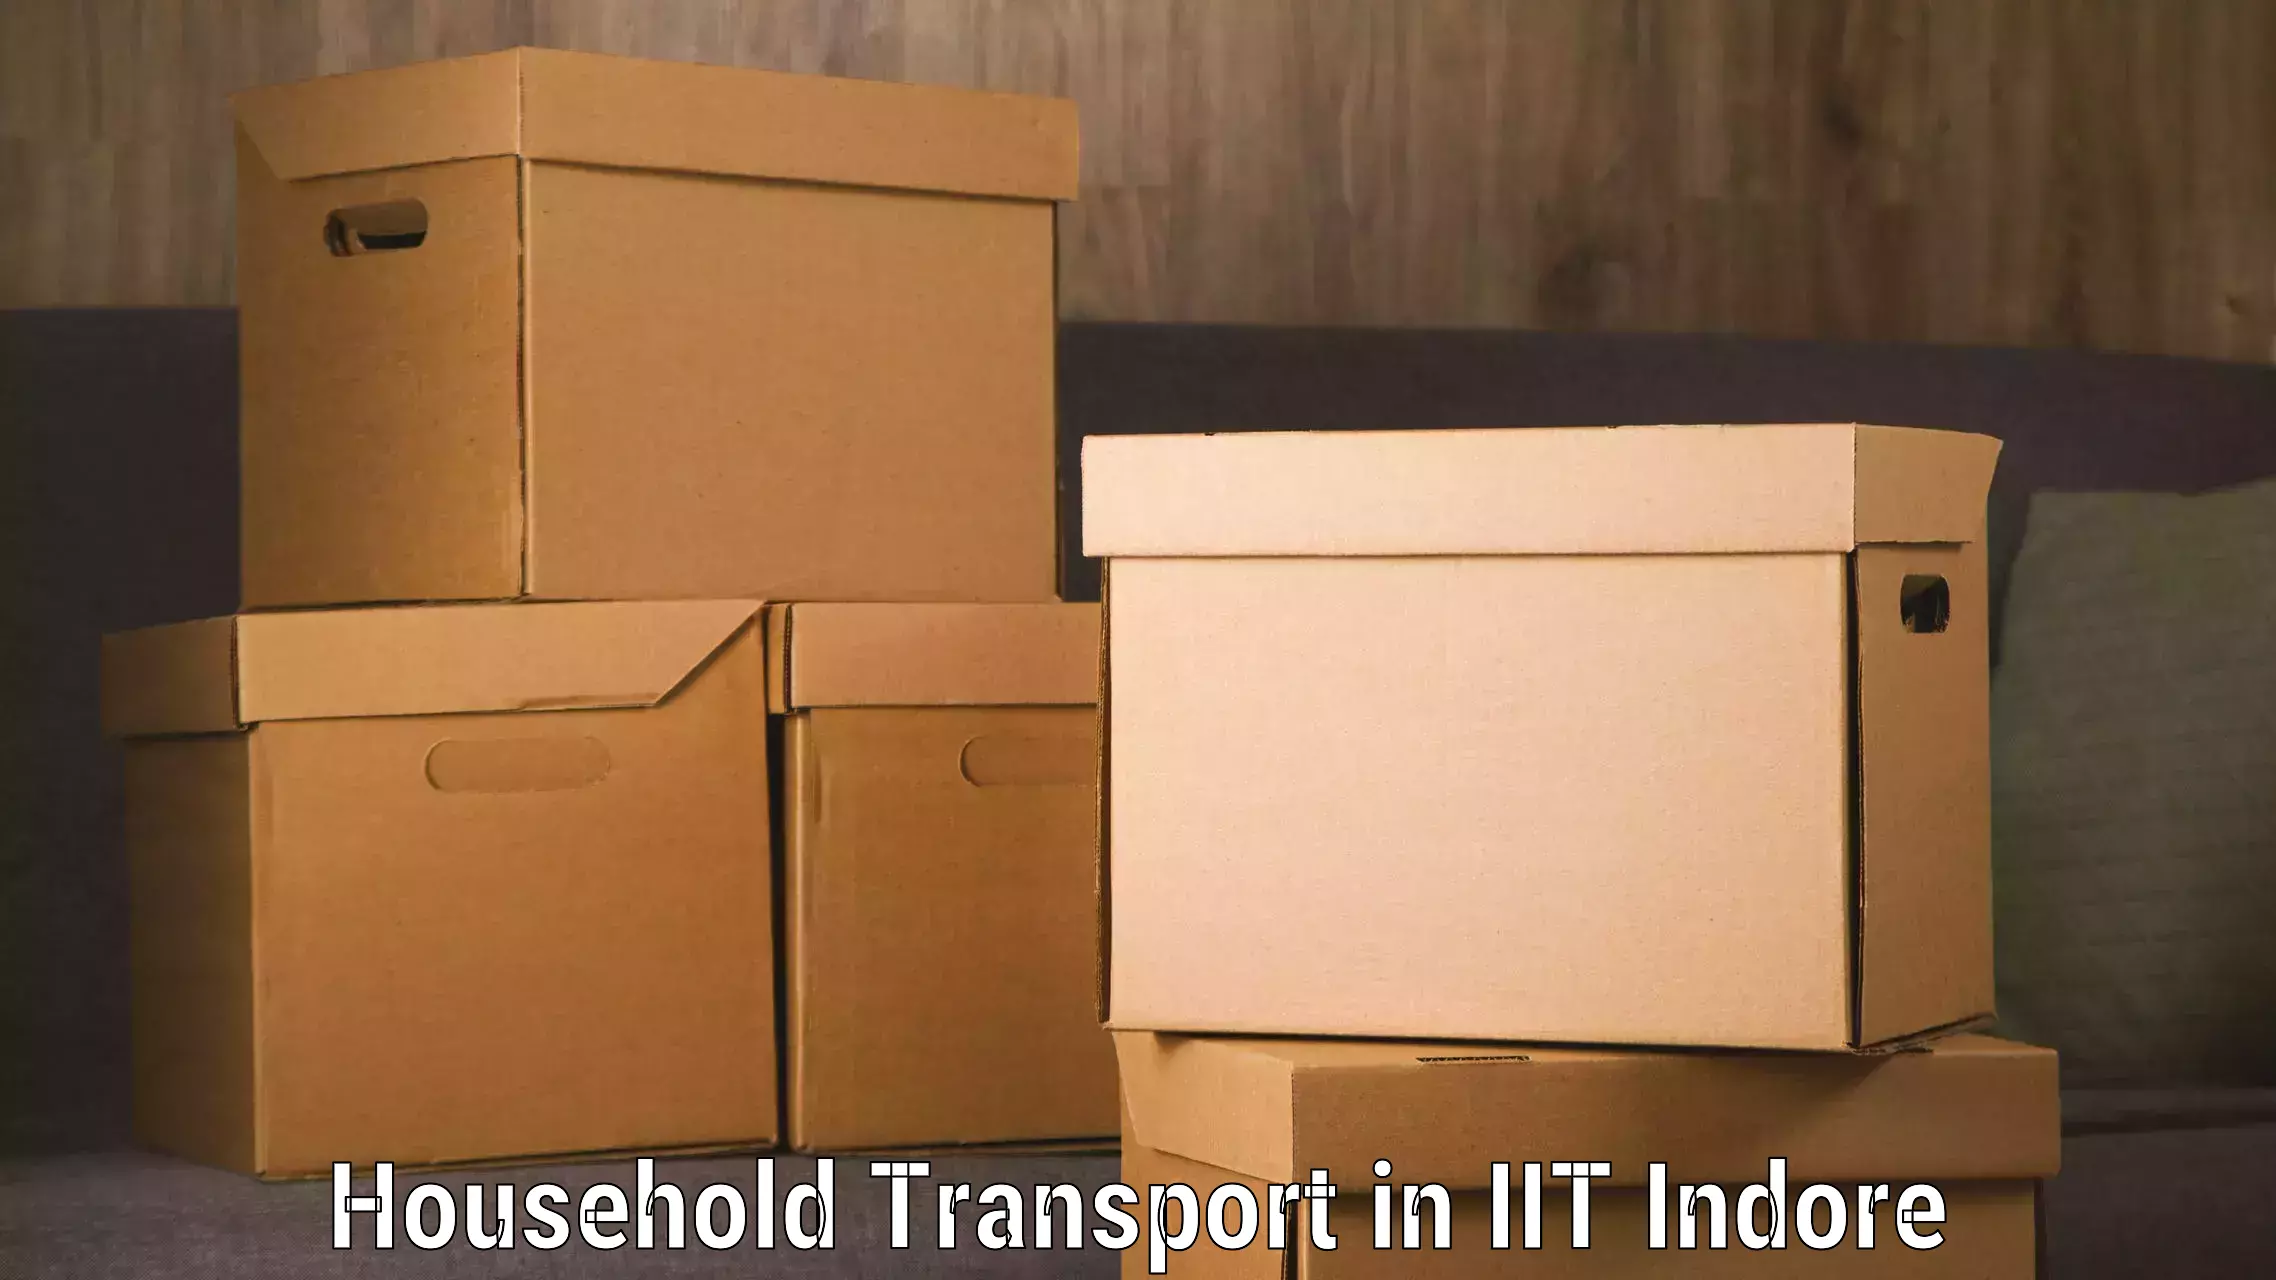 Efficient furniture movers in IIT Indore